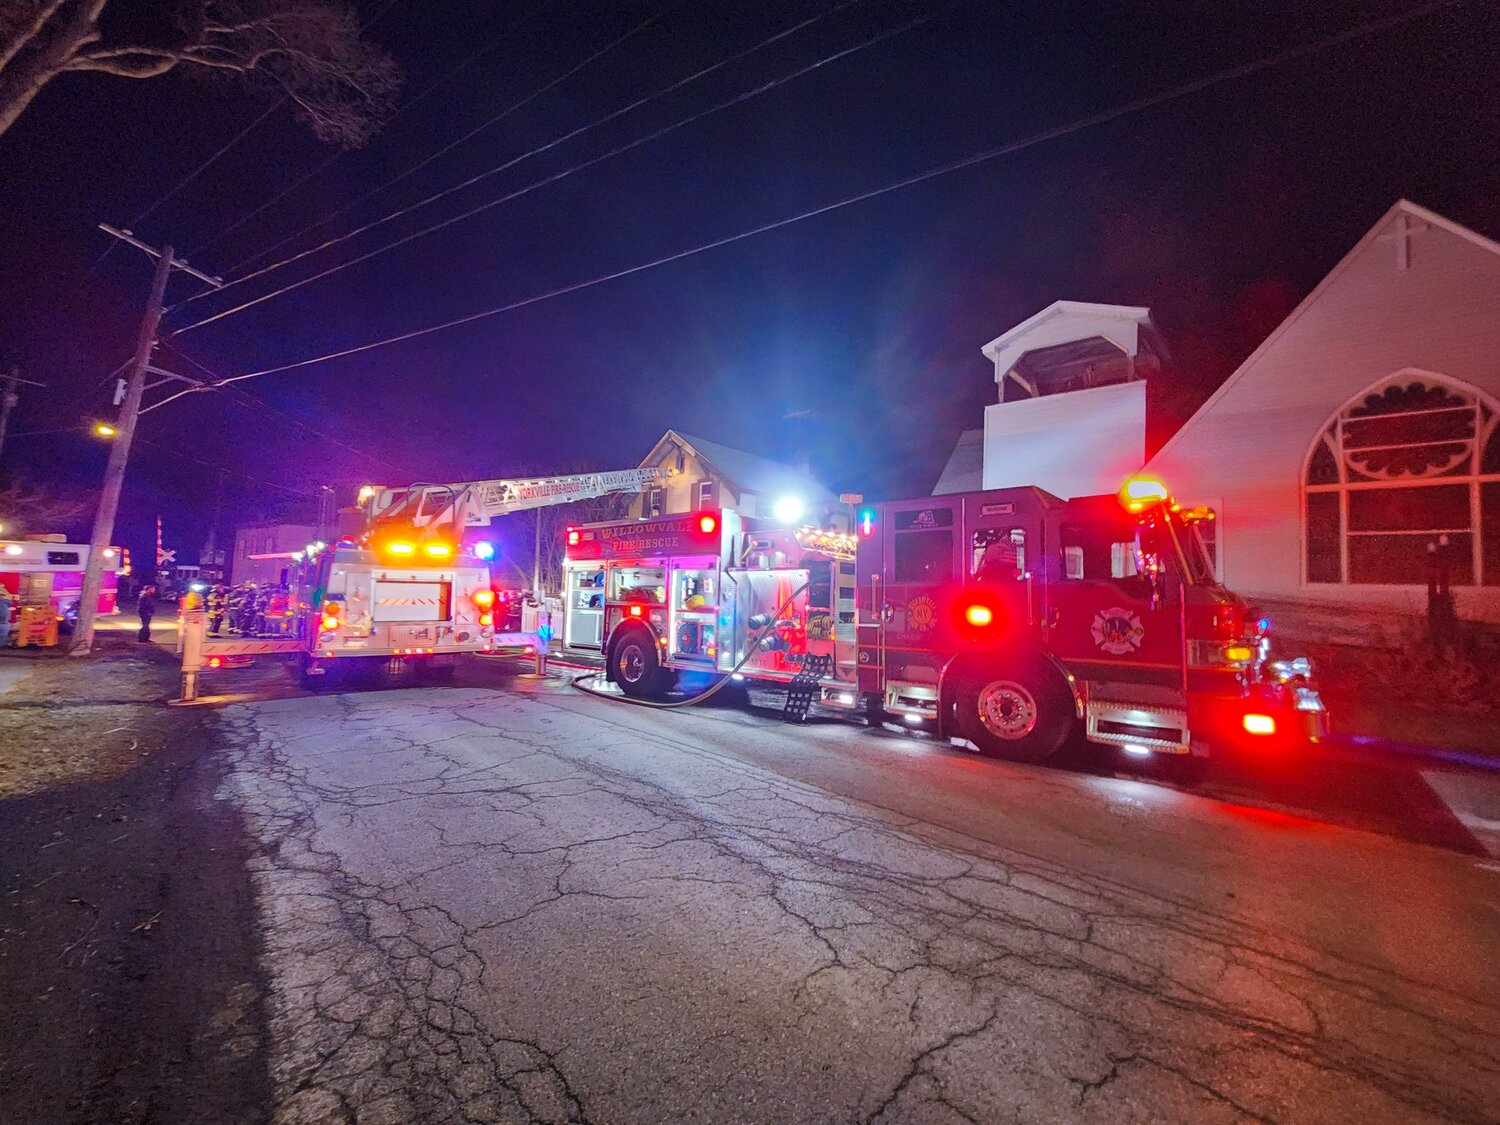 The Willowvale Fire Company, Inc., responded to a report of a structure fire at 9387 Elm St. in Chadwicks at about 8:21 p.m.